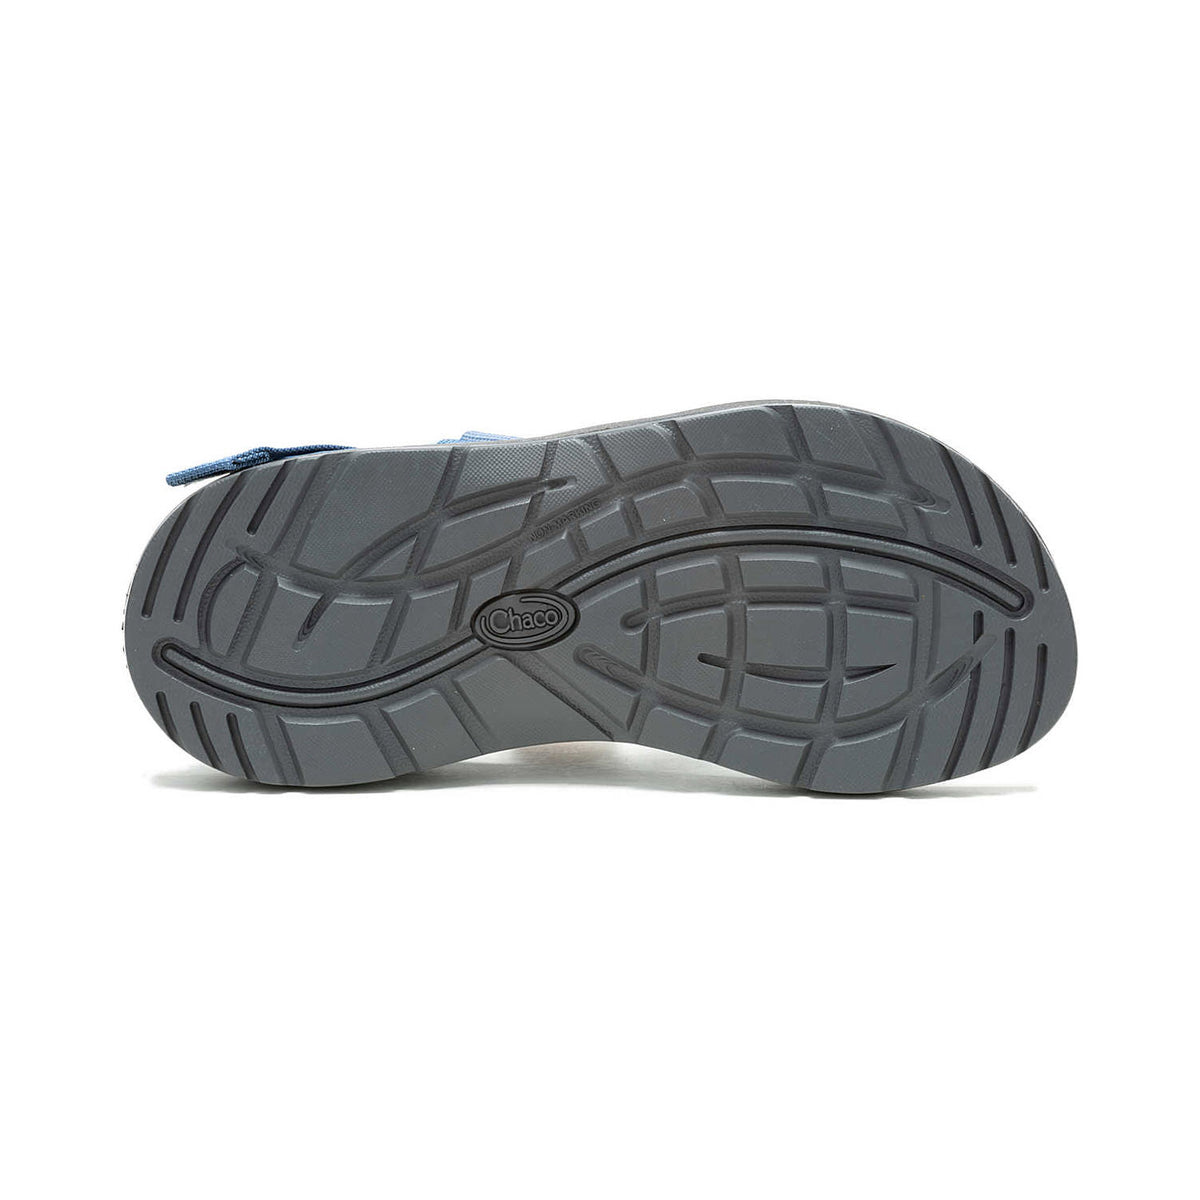 Bottom view of a gray CHACO MEGA Z/CLOUD AGATE BAKED CLAY - WOMENS shoe displaying a ChacoGrip rubber outsole with the brand name &quot;chaco&quot; embossed in the center.